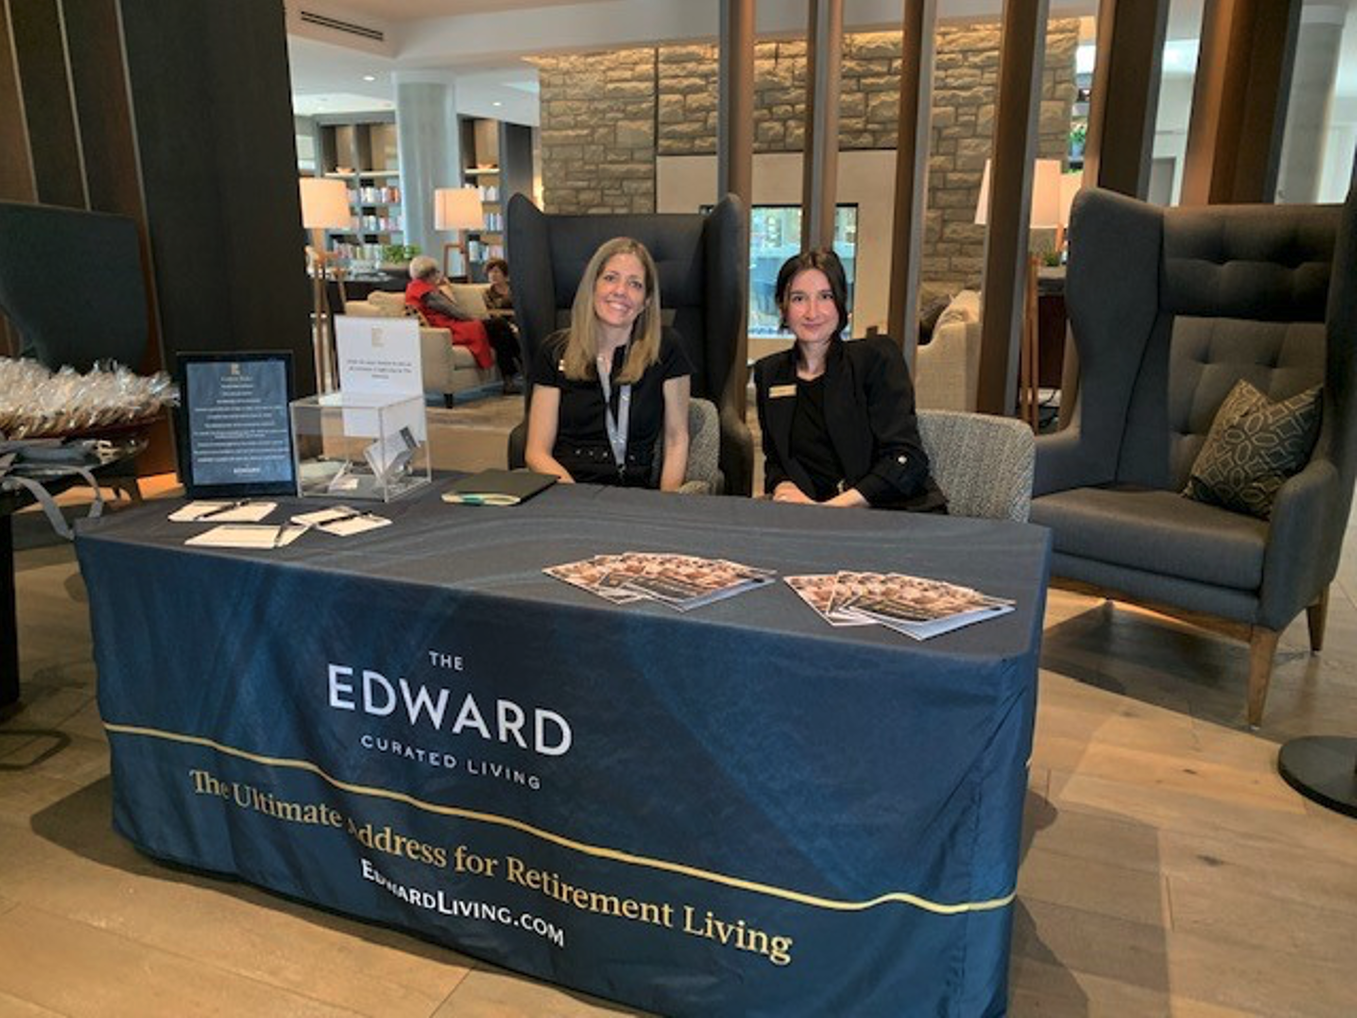 Two women sit at a promotional table with a tablecloth that says The Edward Curated Living The Ultimate address for retirement living edwardliving.com